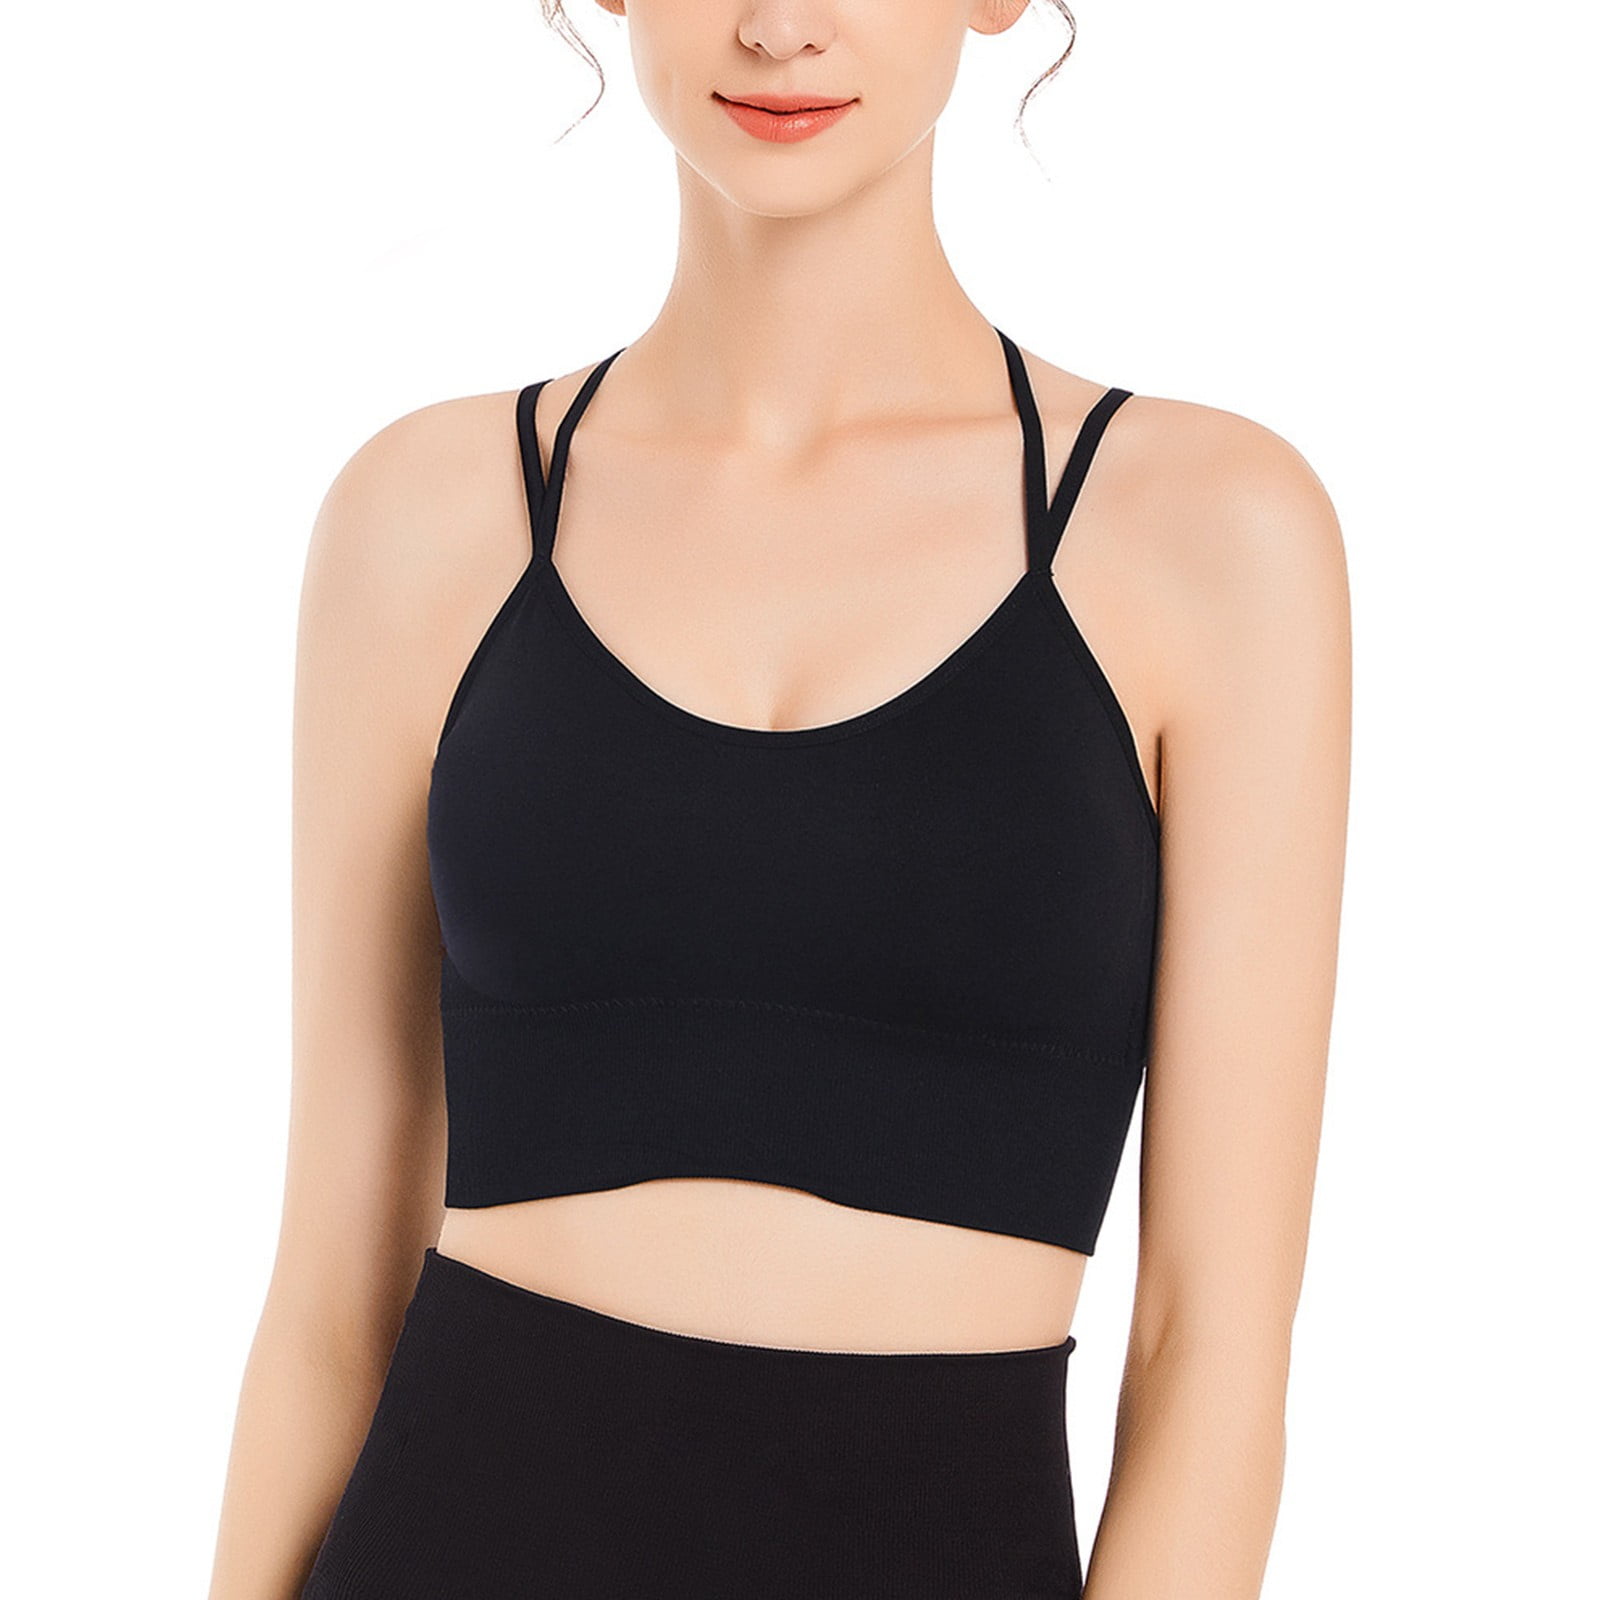 CAICJ98 Sports Bras for Women High Support Sports Bras for Women